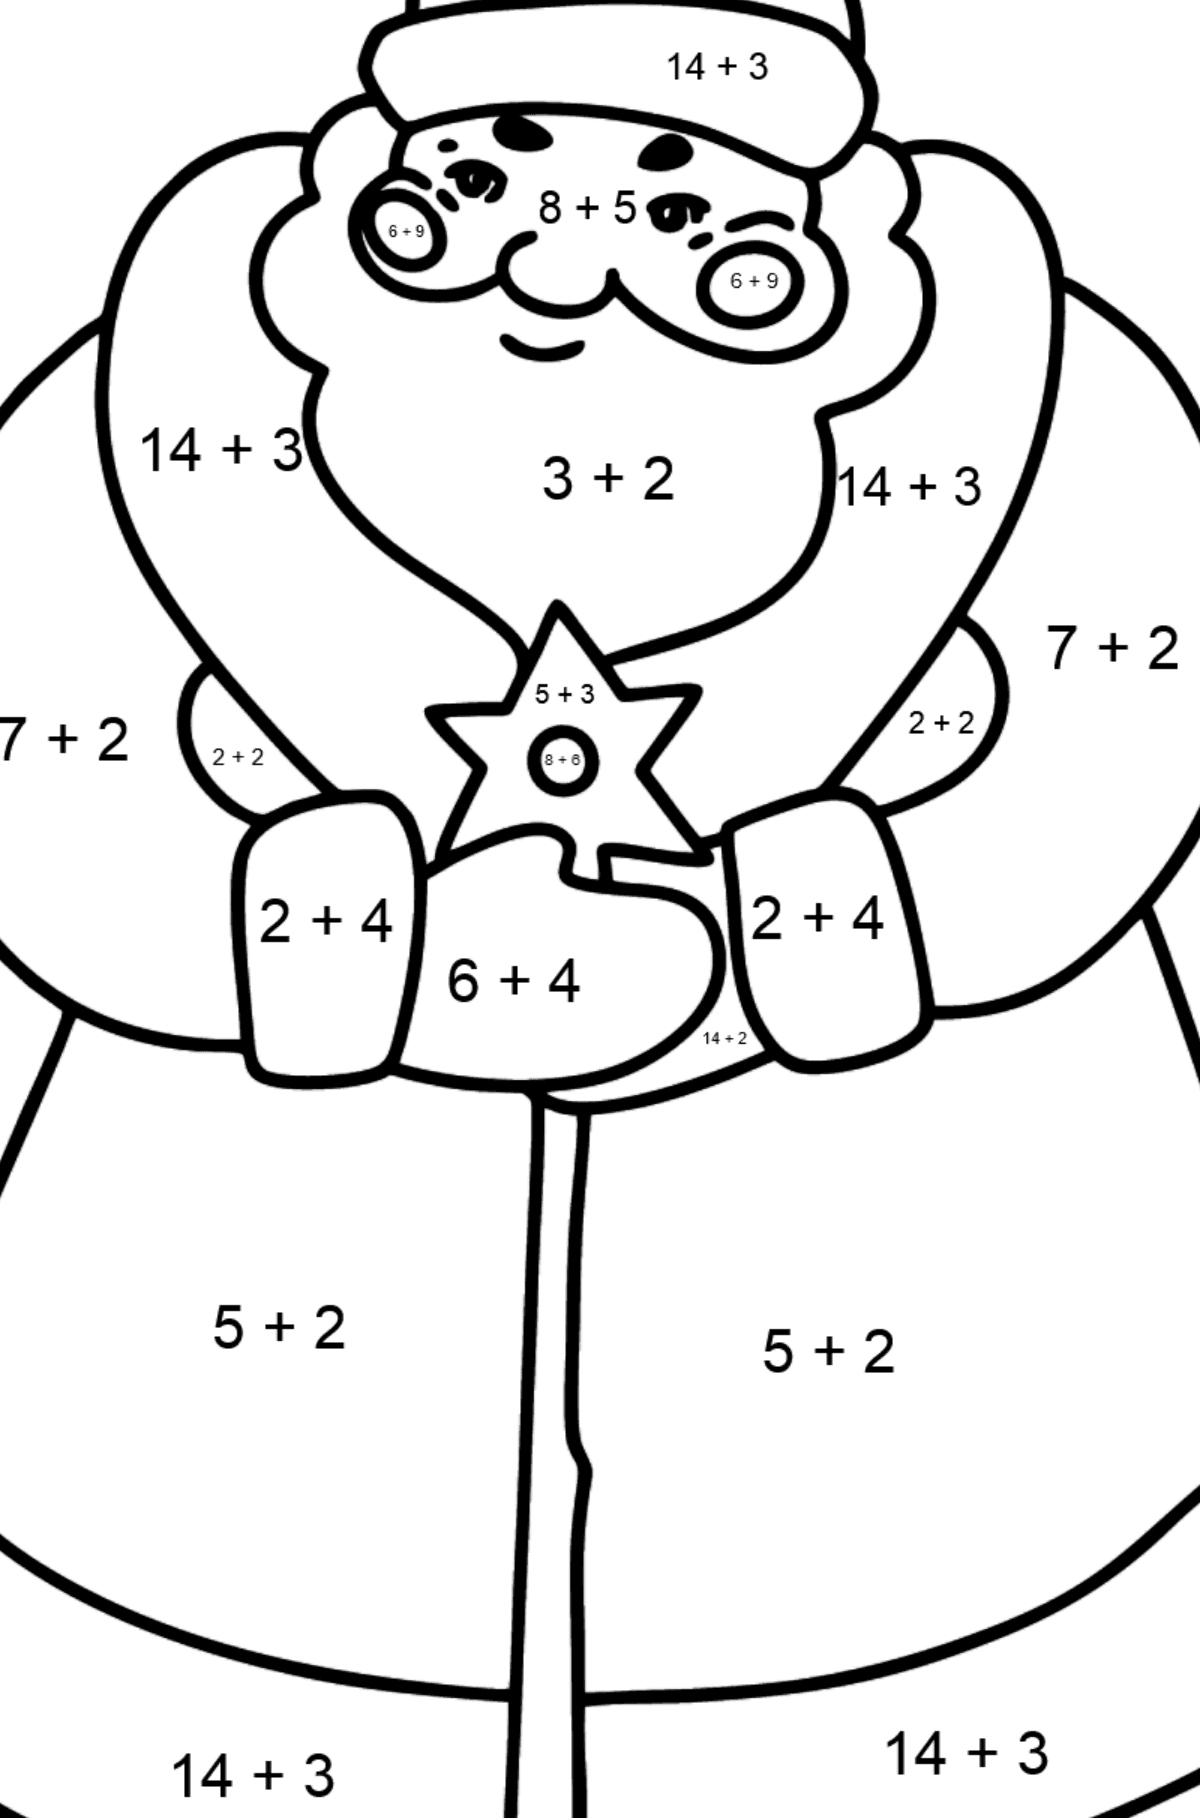 Good Father Frost coloring page - Math Coloring - Addition for Kids